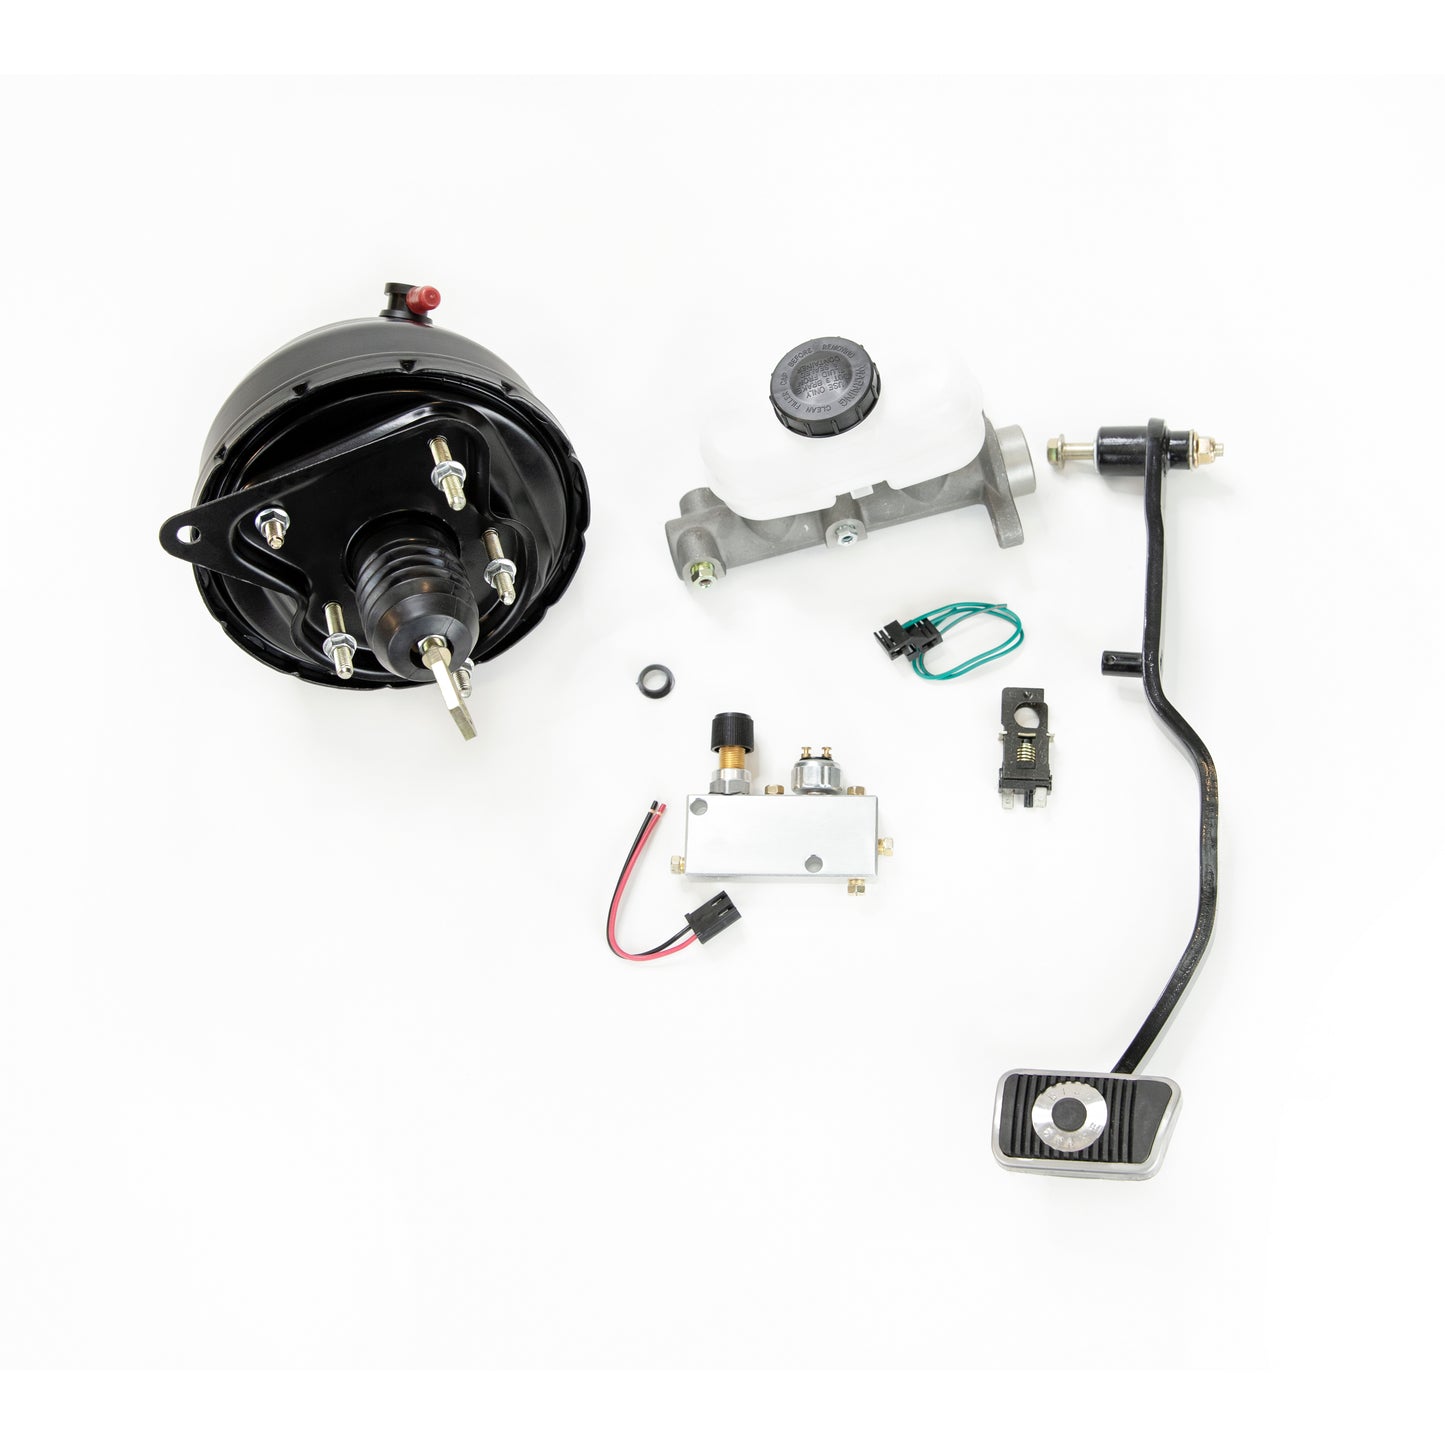 Power Brake Upgrade / Replacement for a Manual Transmission 67-70 Mustang or Cougar for an All Wheel Disc Brake Car